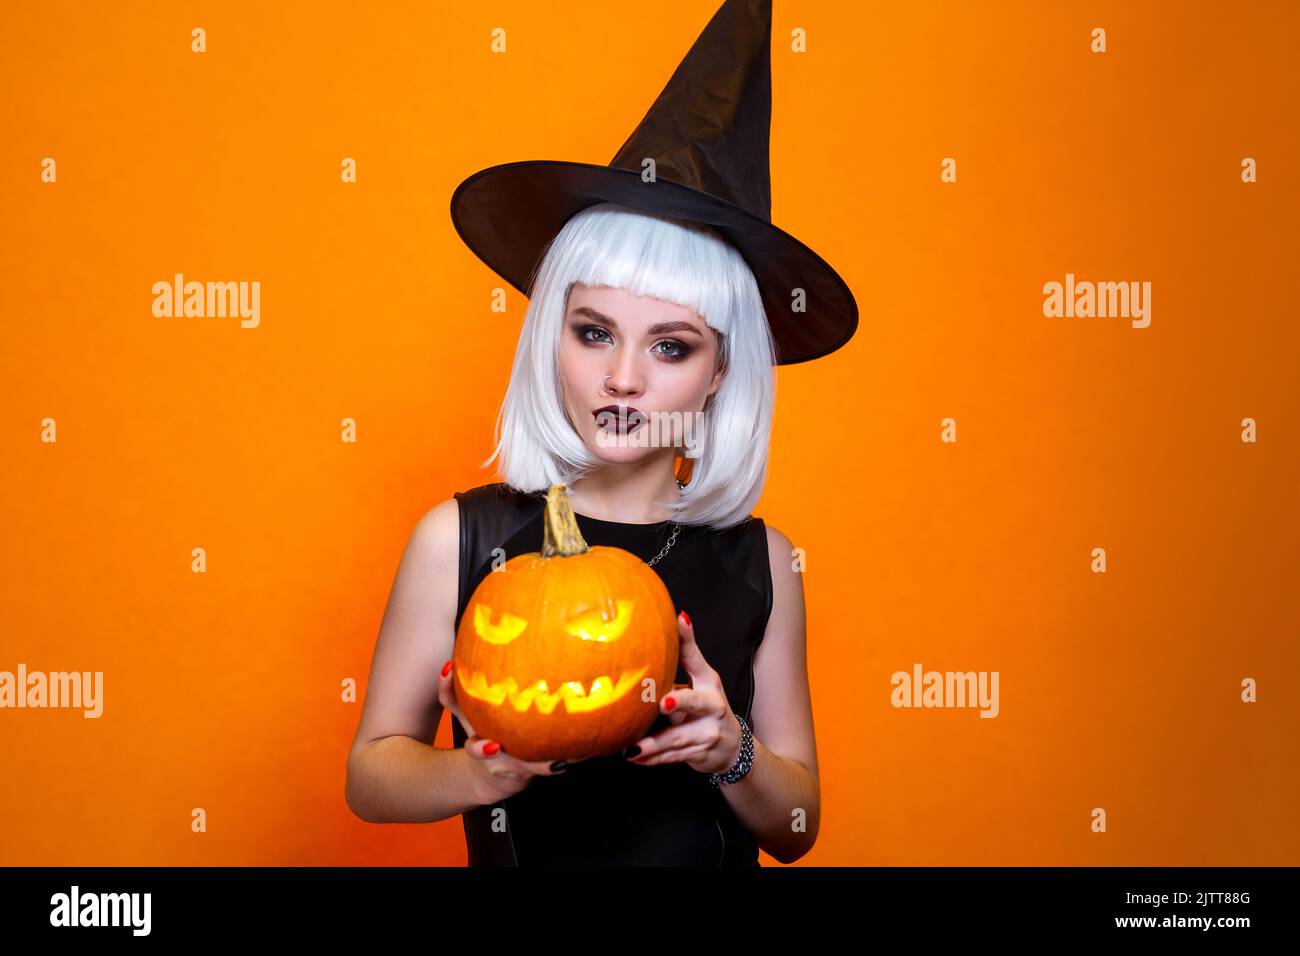 Halloween witch in hat and costume holding carved pumpkin on orange background. Stock Photo